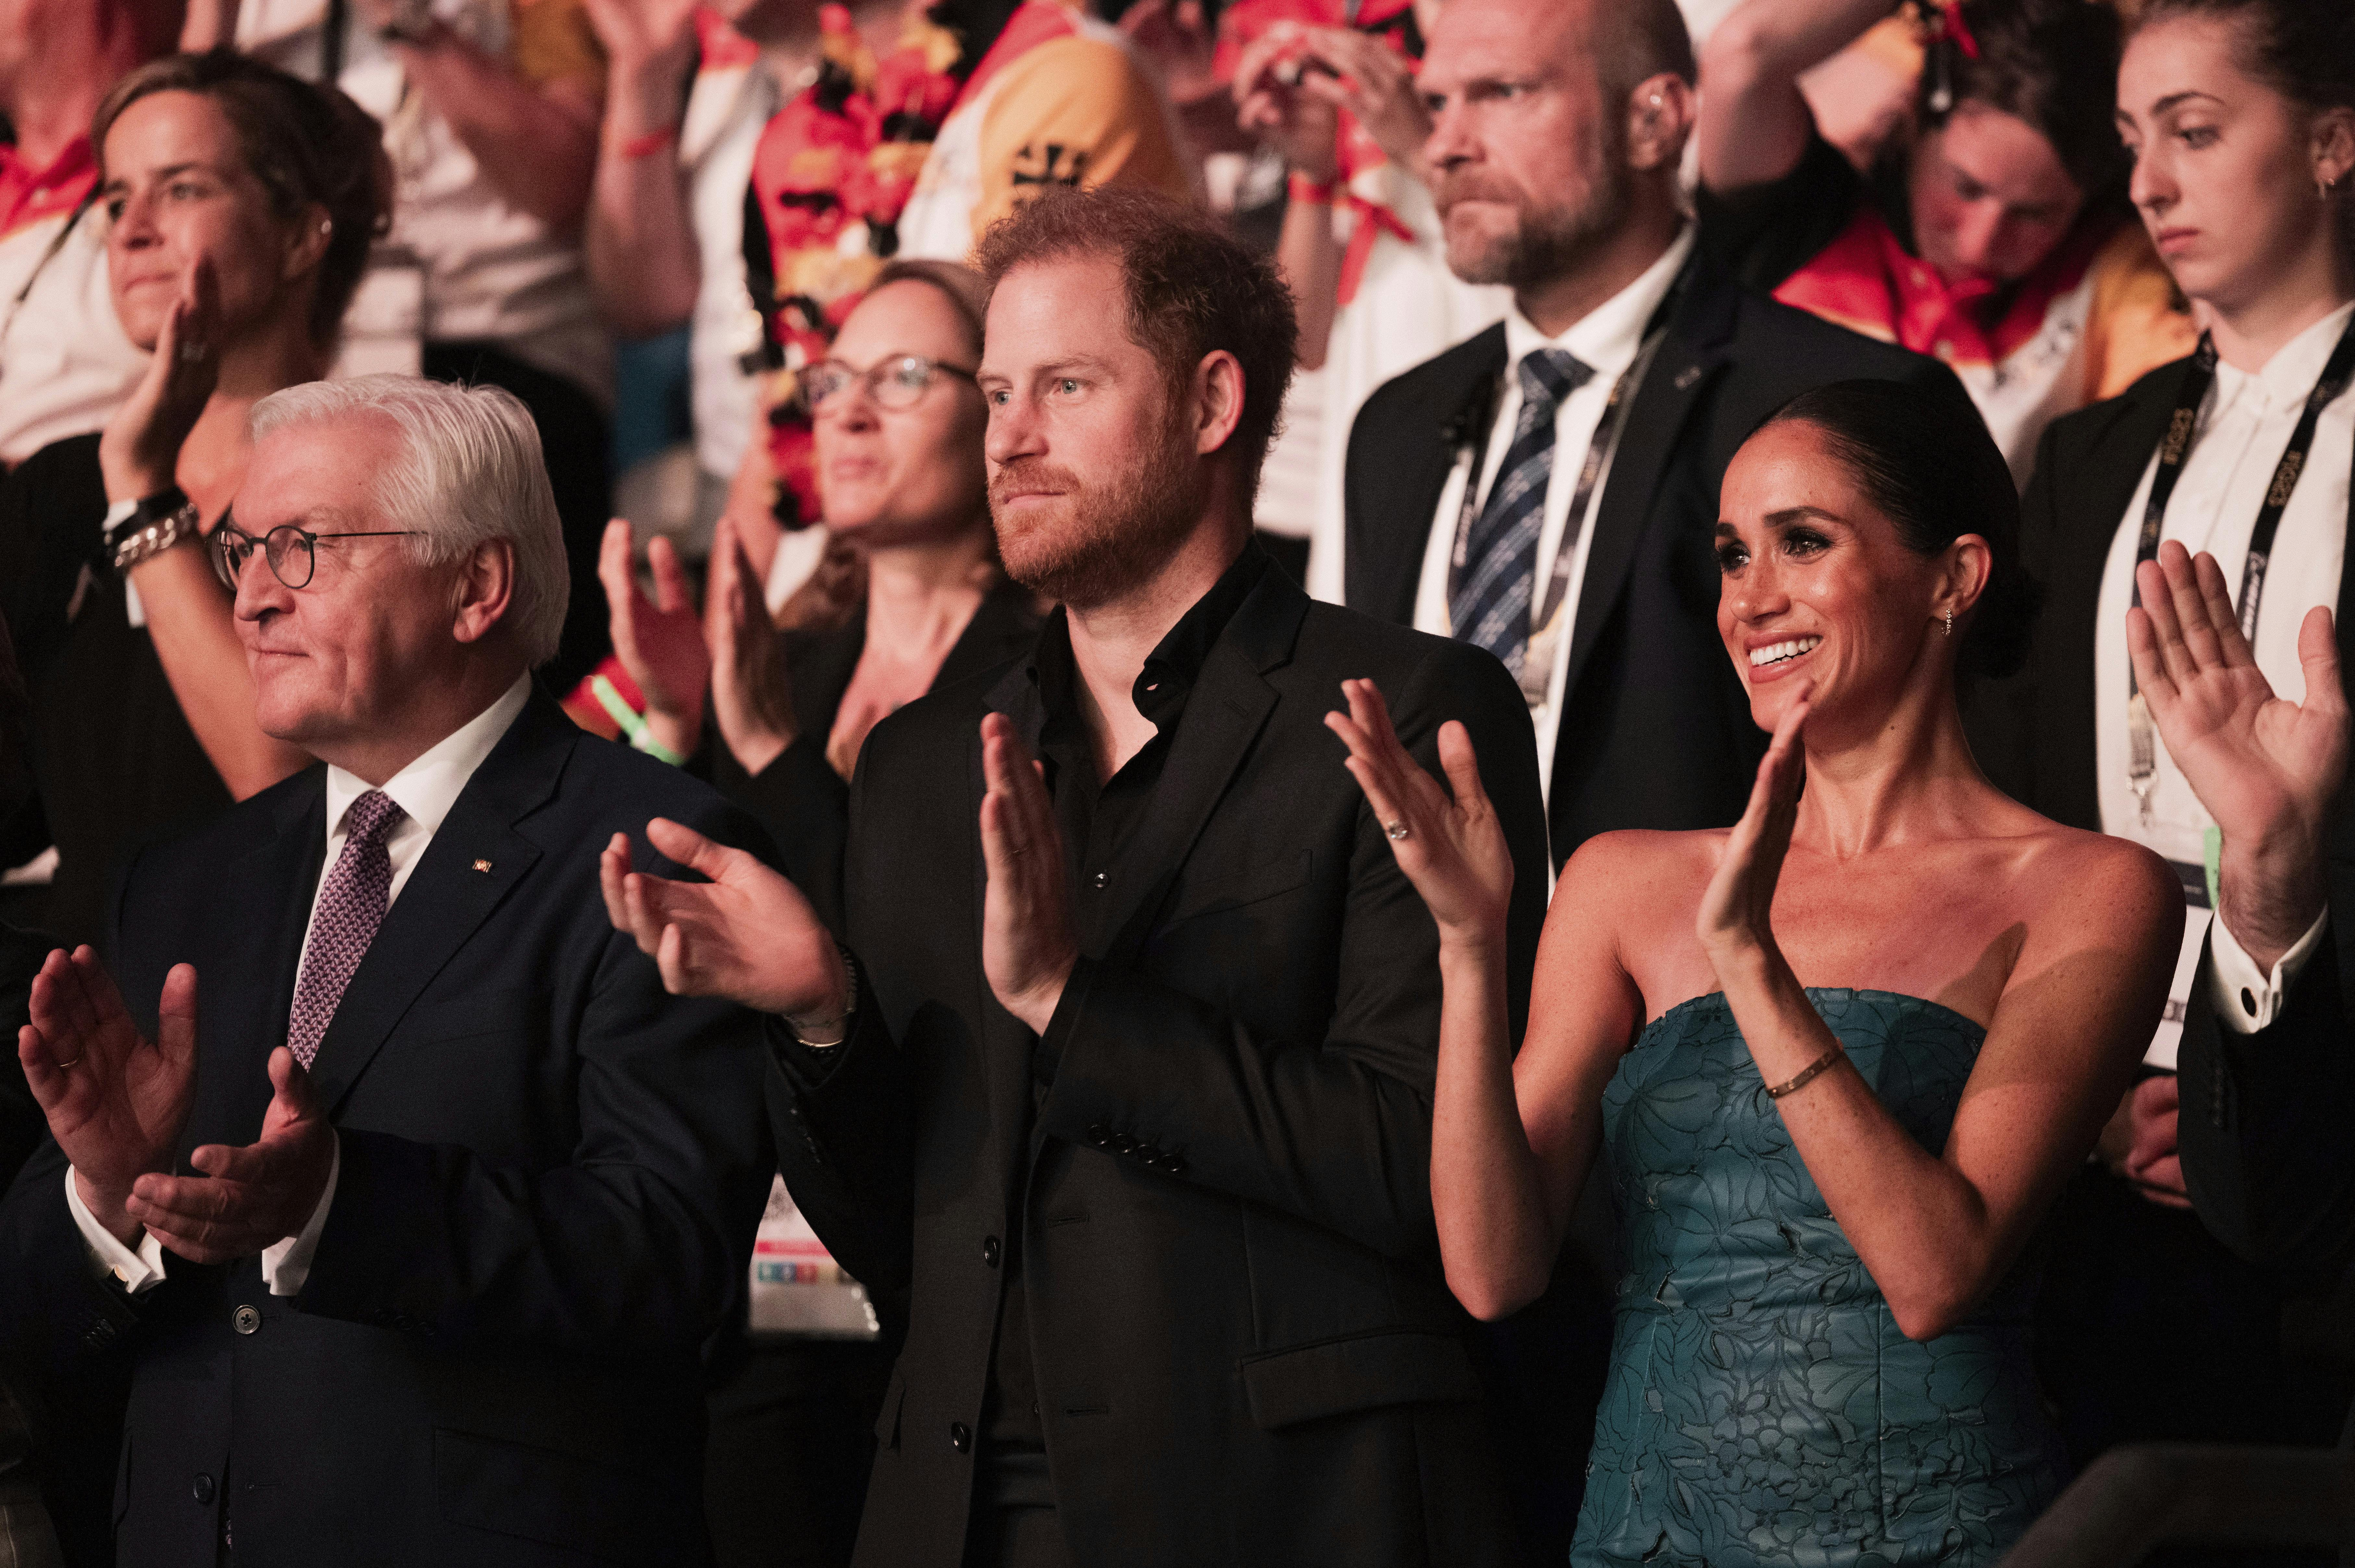 16 September 2023, North Rhine-Westphalia, Duesseldorf: Prince Harry (M), Duke of Sussex, and his wife Meghan, Duchess of Sussex, and German President Frank-Walter Steinmeier attend the closing ceremony of the 6th Invictus Games at the Merkur Spiel Arena. The Paralympic competition for war-disabled athletes was hosted in Germany for the first time. Photo by: Rolf Vennenbernd/picture-alliance/dpa/AP Images